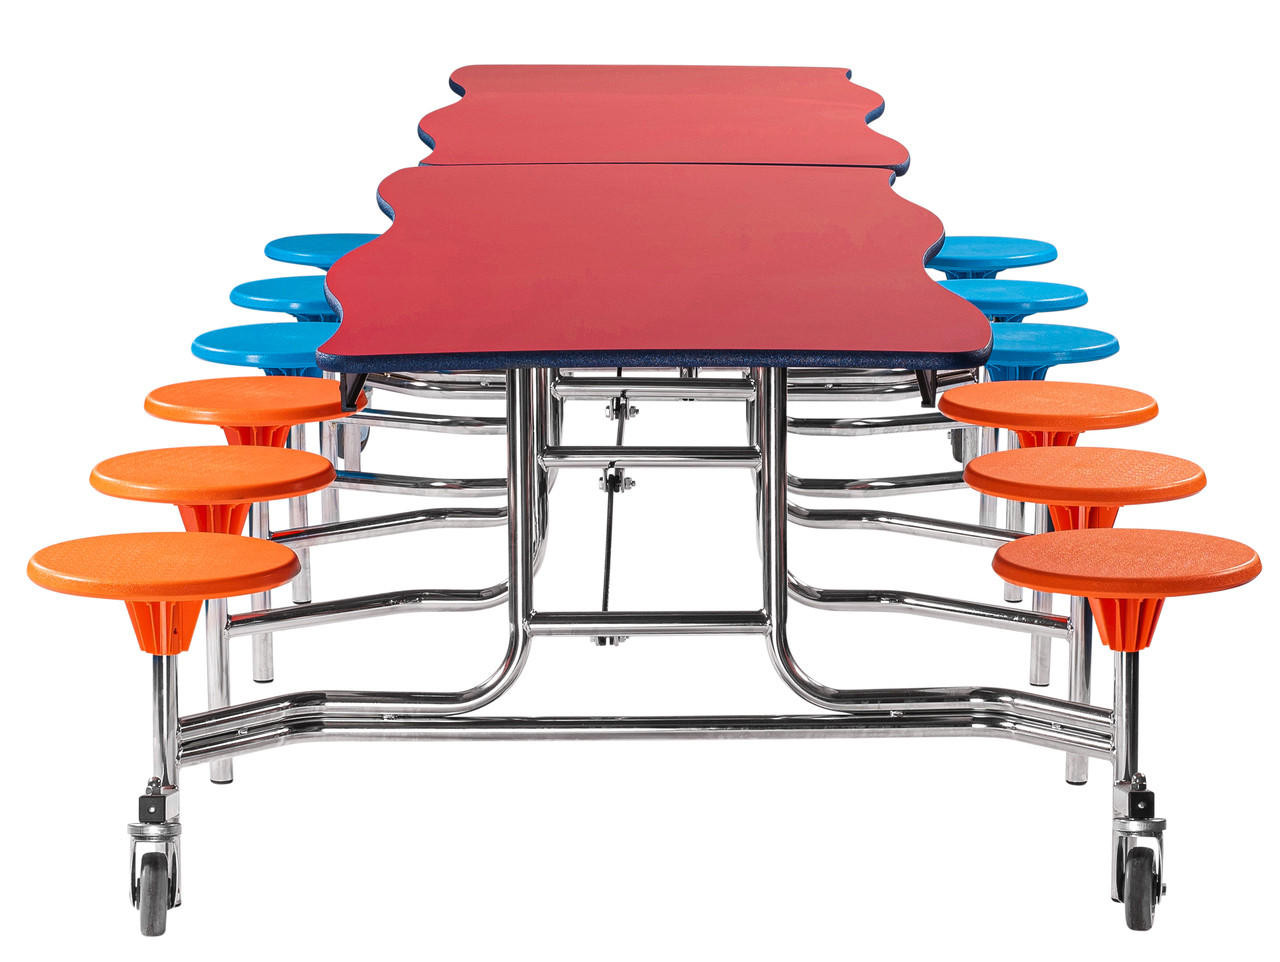 https://www.shifflerequip.com/nps-mobile-cafeteria-table-w-stools-8-swerve-plywood-core-protectedge-textured-black-frame-with-chromed-base/